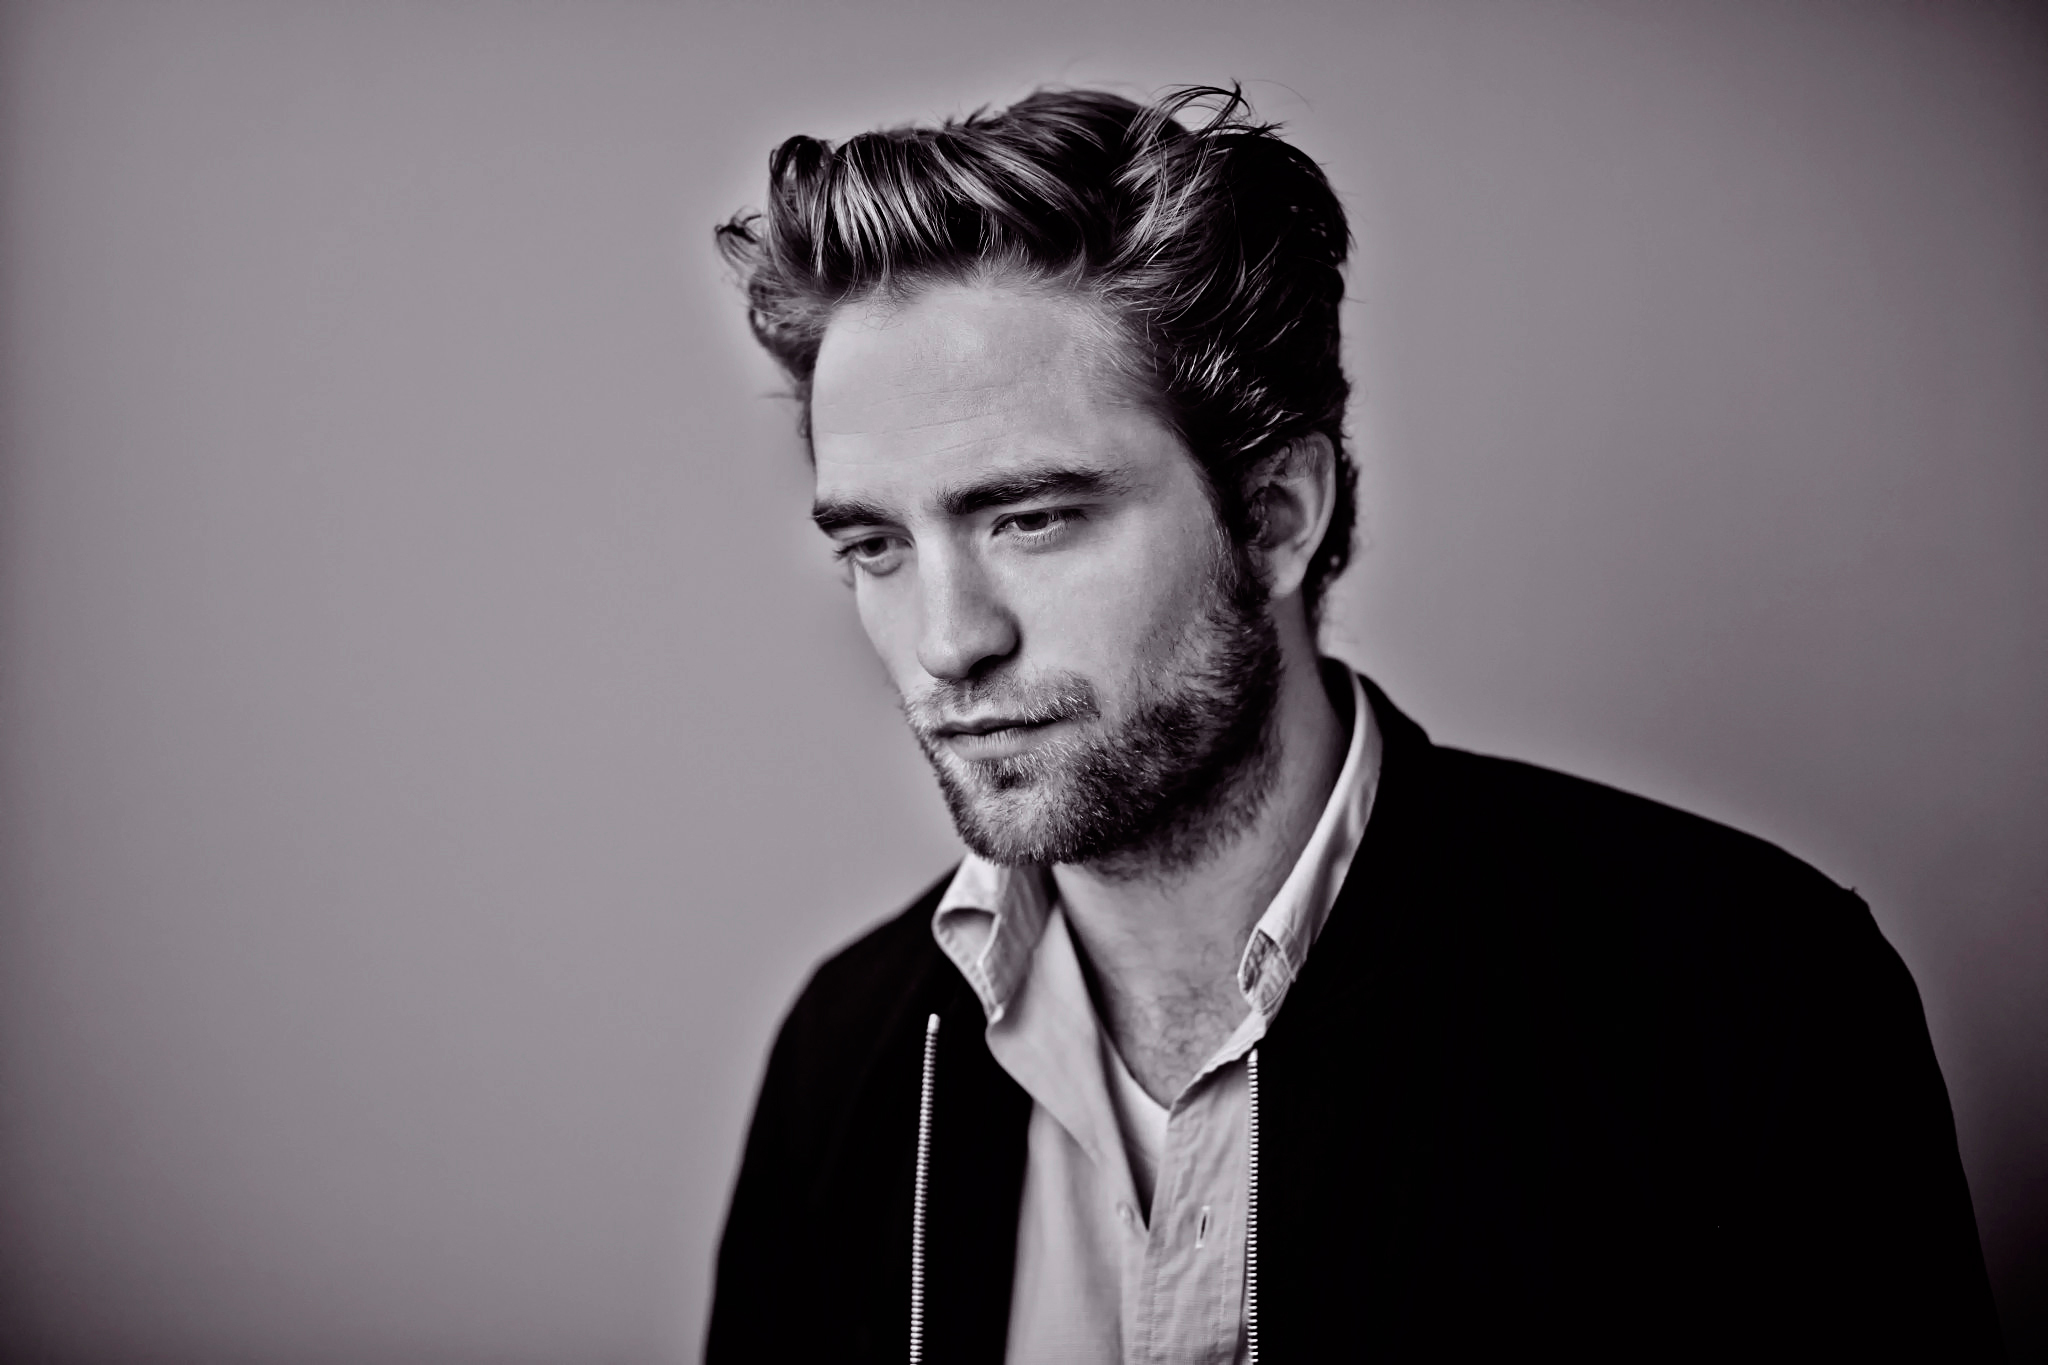 Robert Pattinson Photo Shoot Film Star Map Which Maps To The Stars